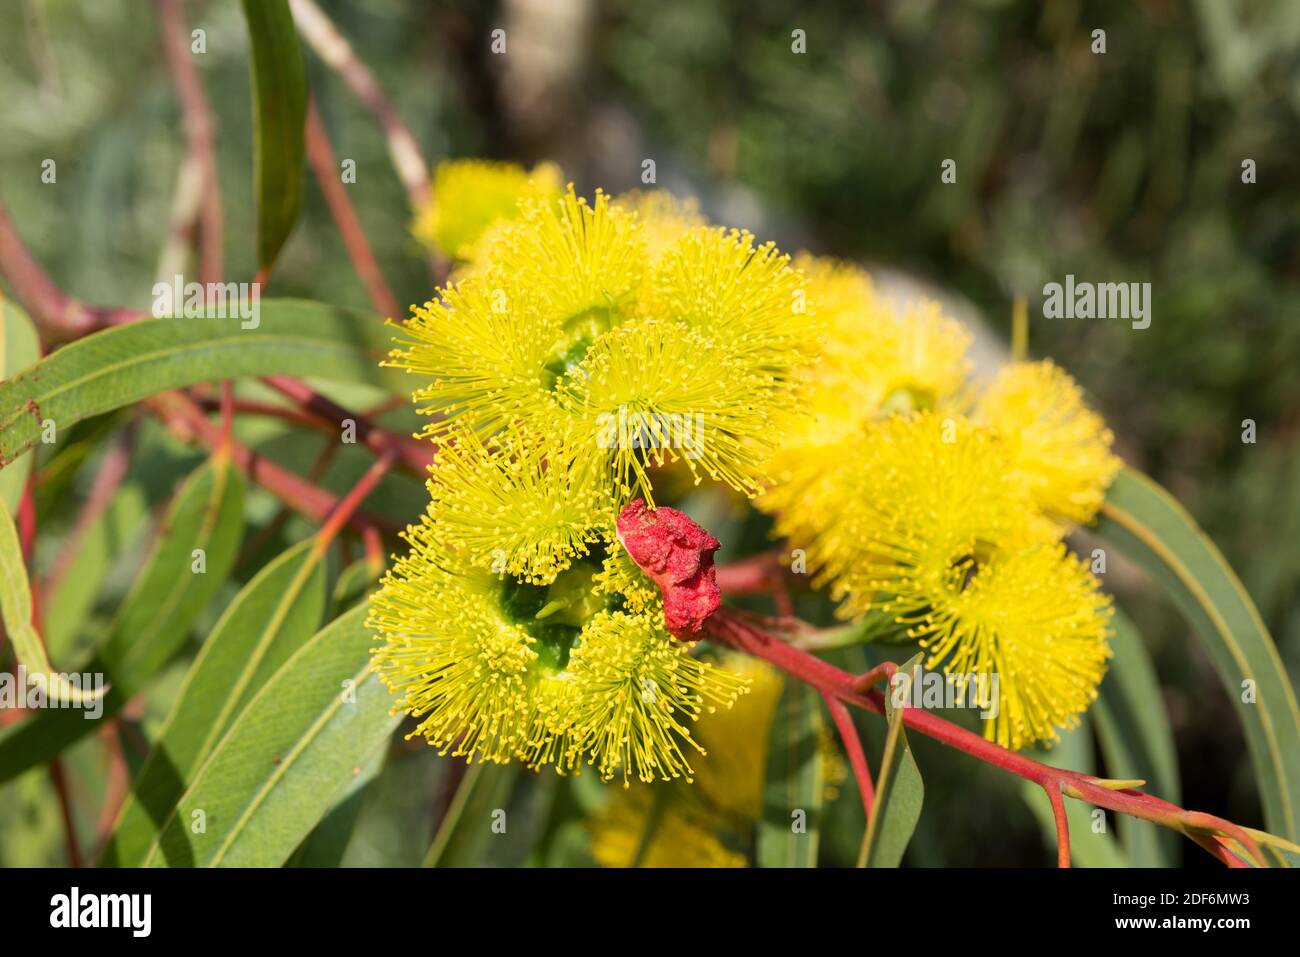 Red-capped gum (Eucalyptus erythrocoris) is a small tree endemic to southwestern Australia. Flowers and leaves detail. Stock Photo